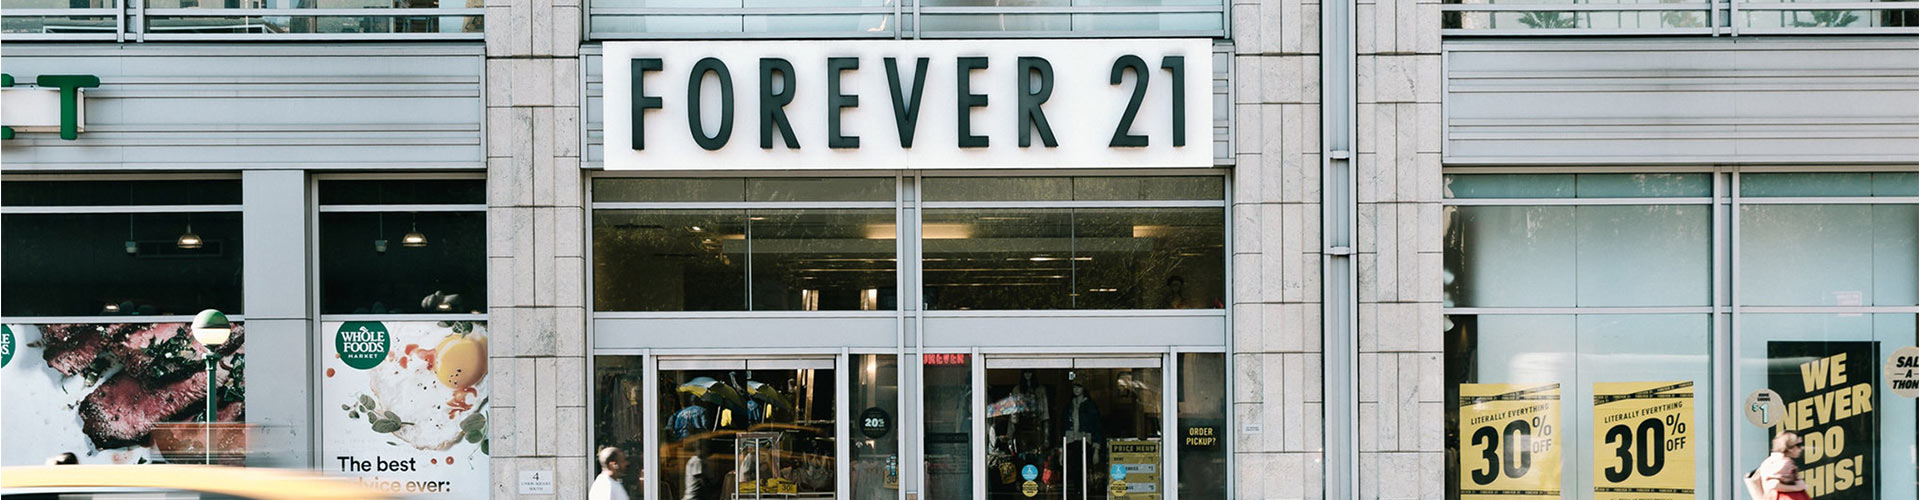 Forever 21 Bankruptcy Signals a Shift in Consumer Tastes blog banner featuring Forever 21 storefront from the street